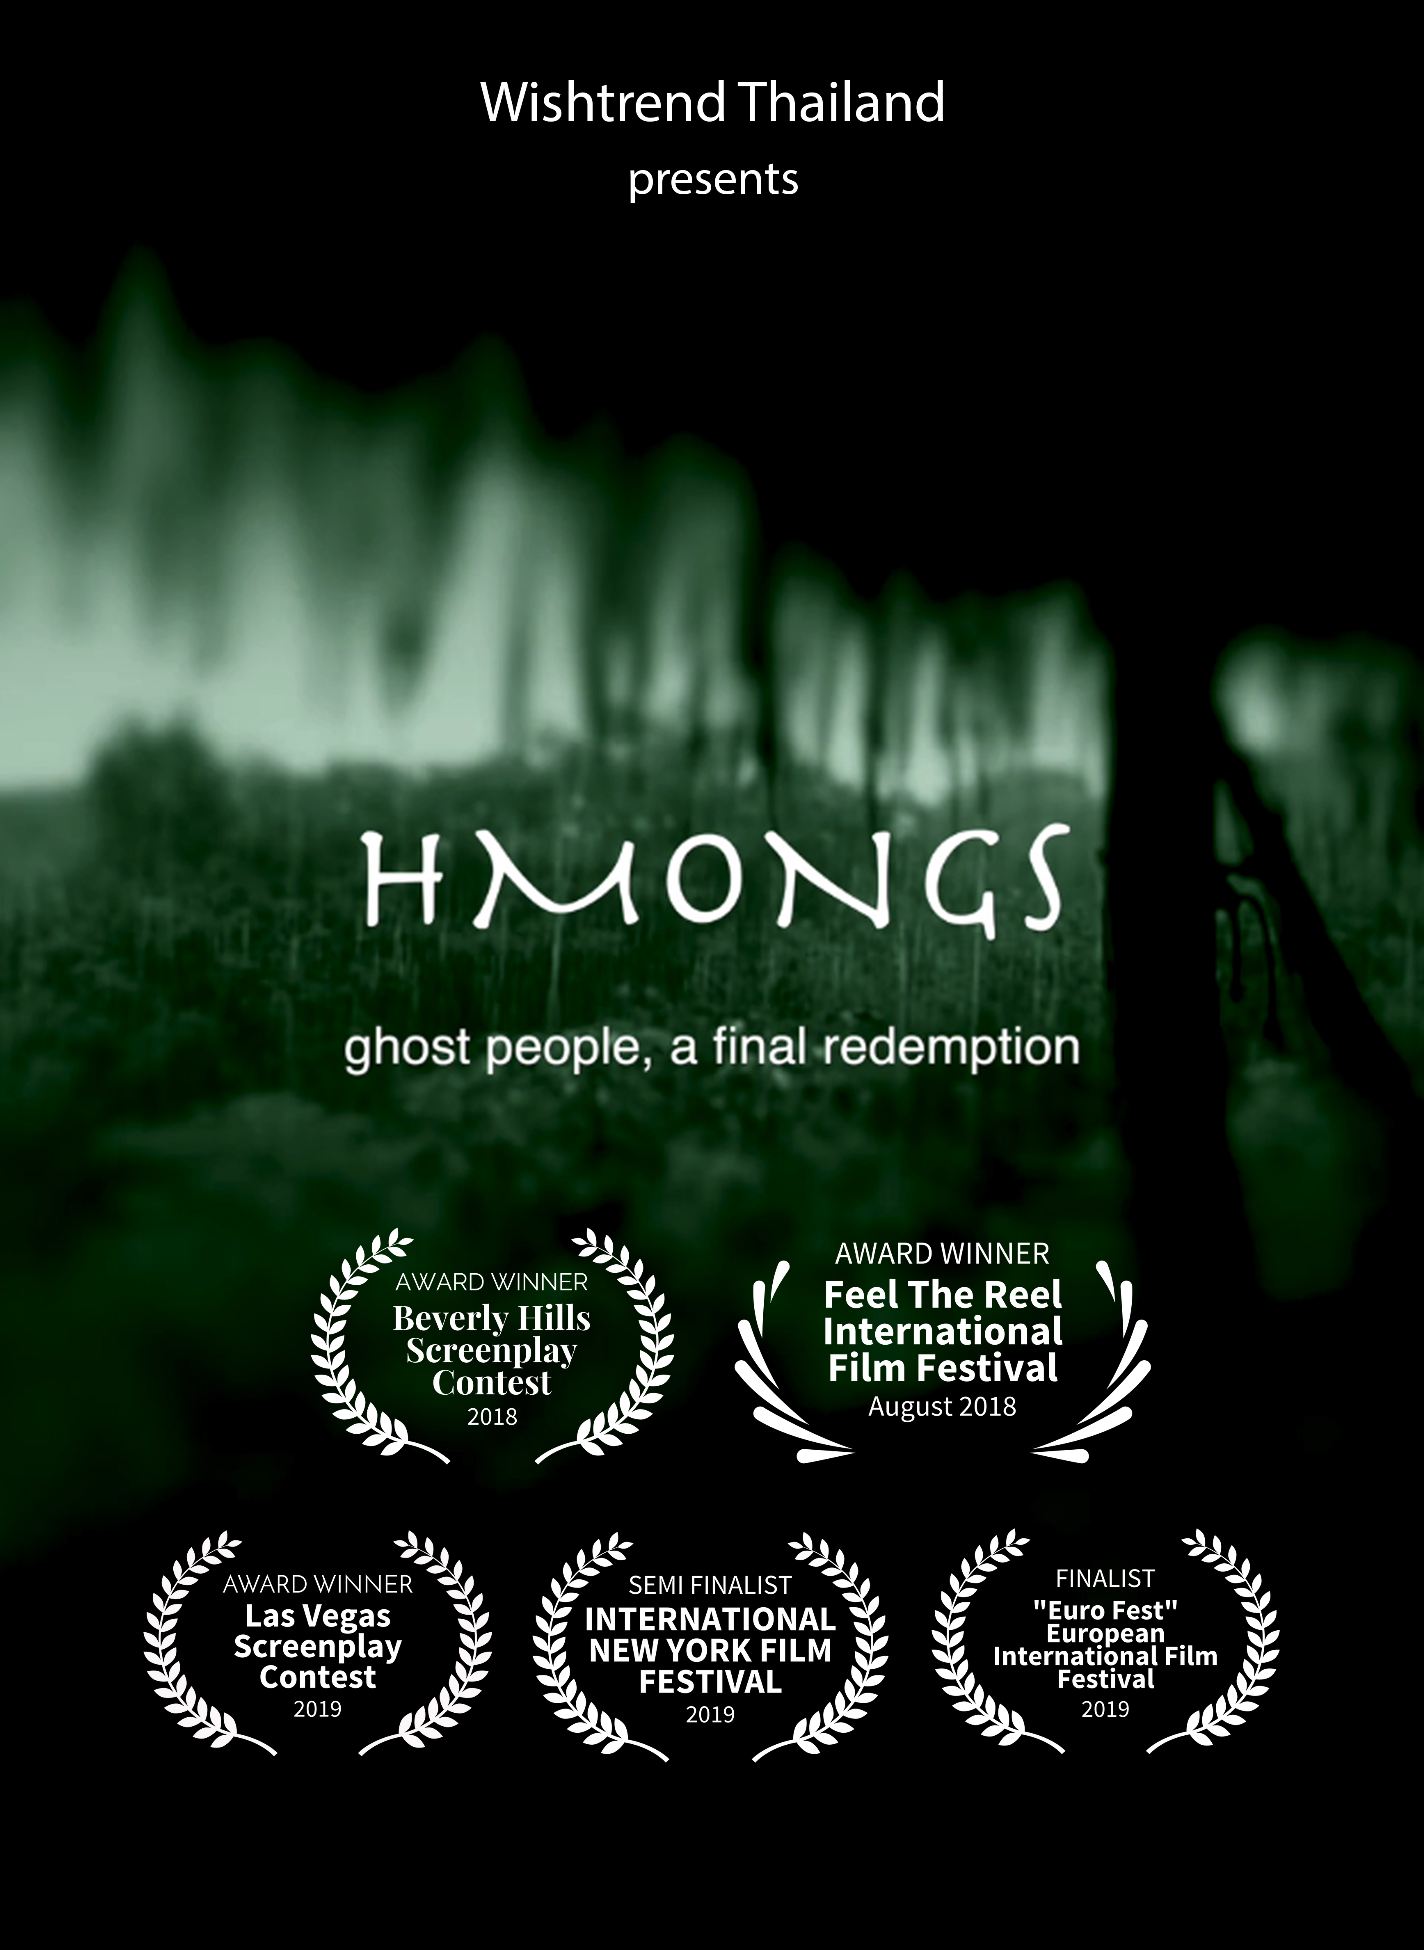 Hmongs Ghost people, a final redemption Poster